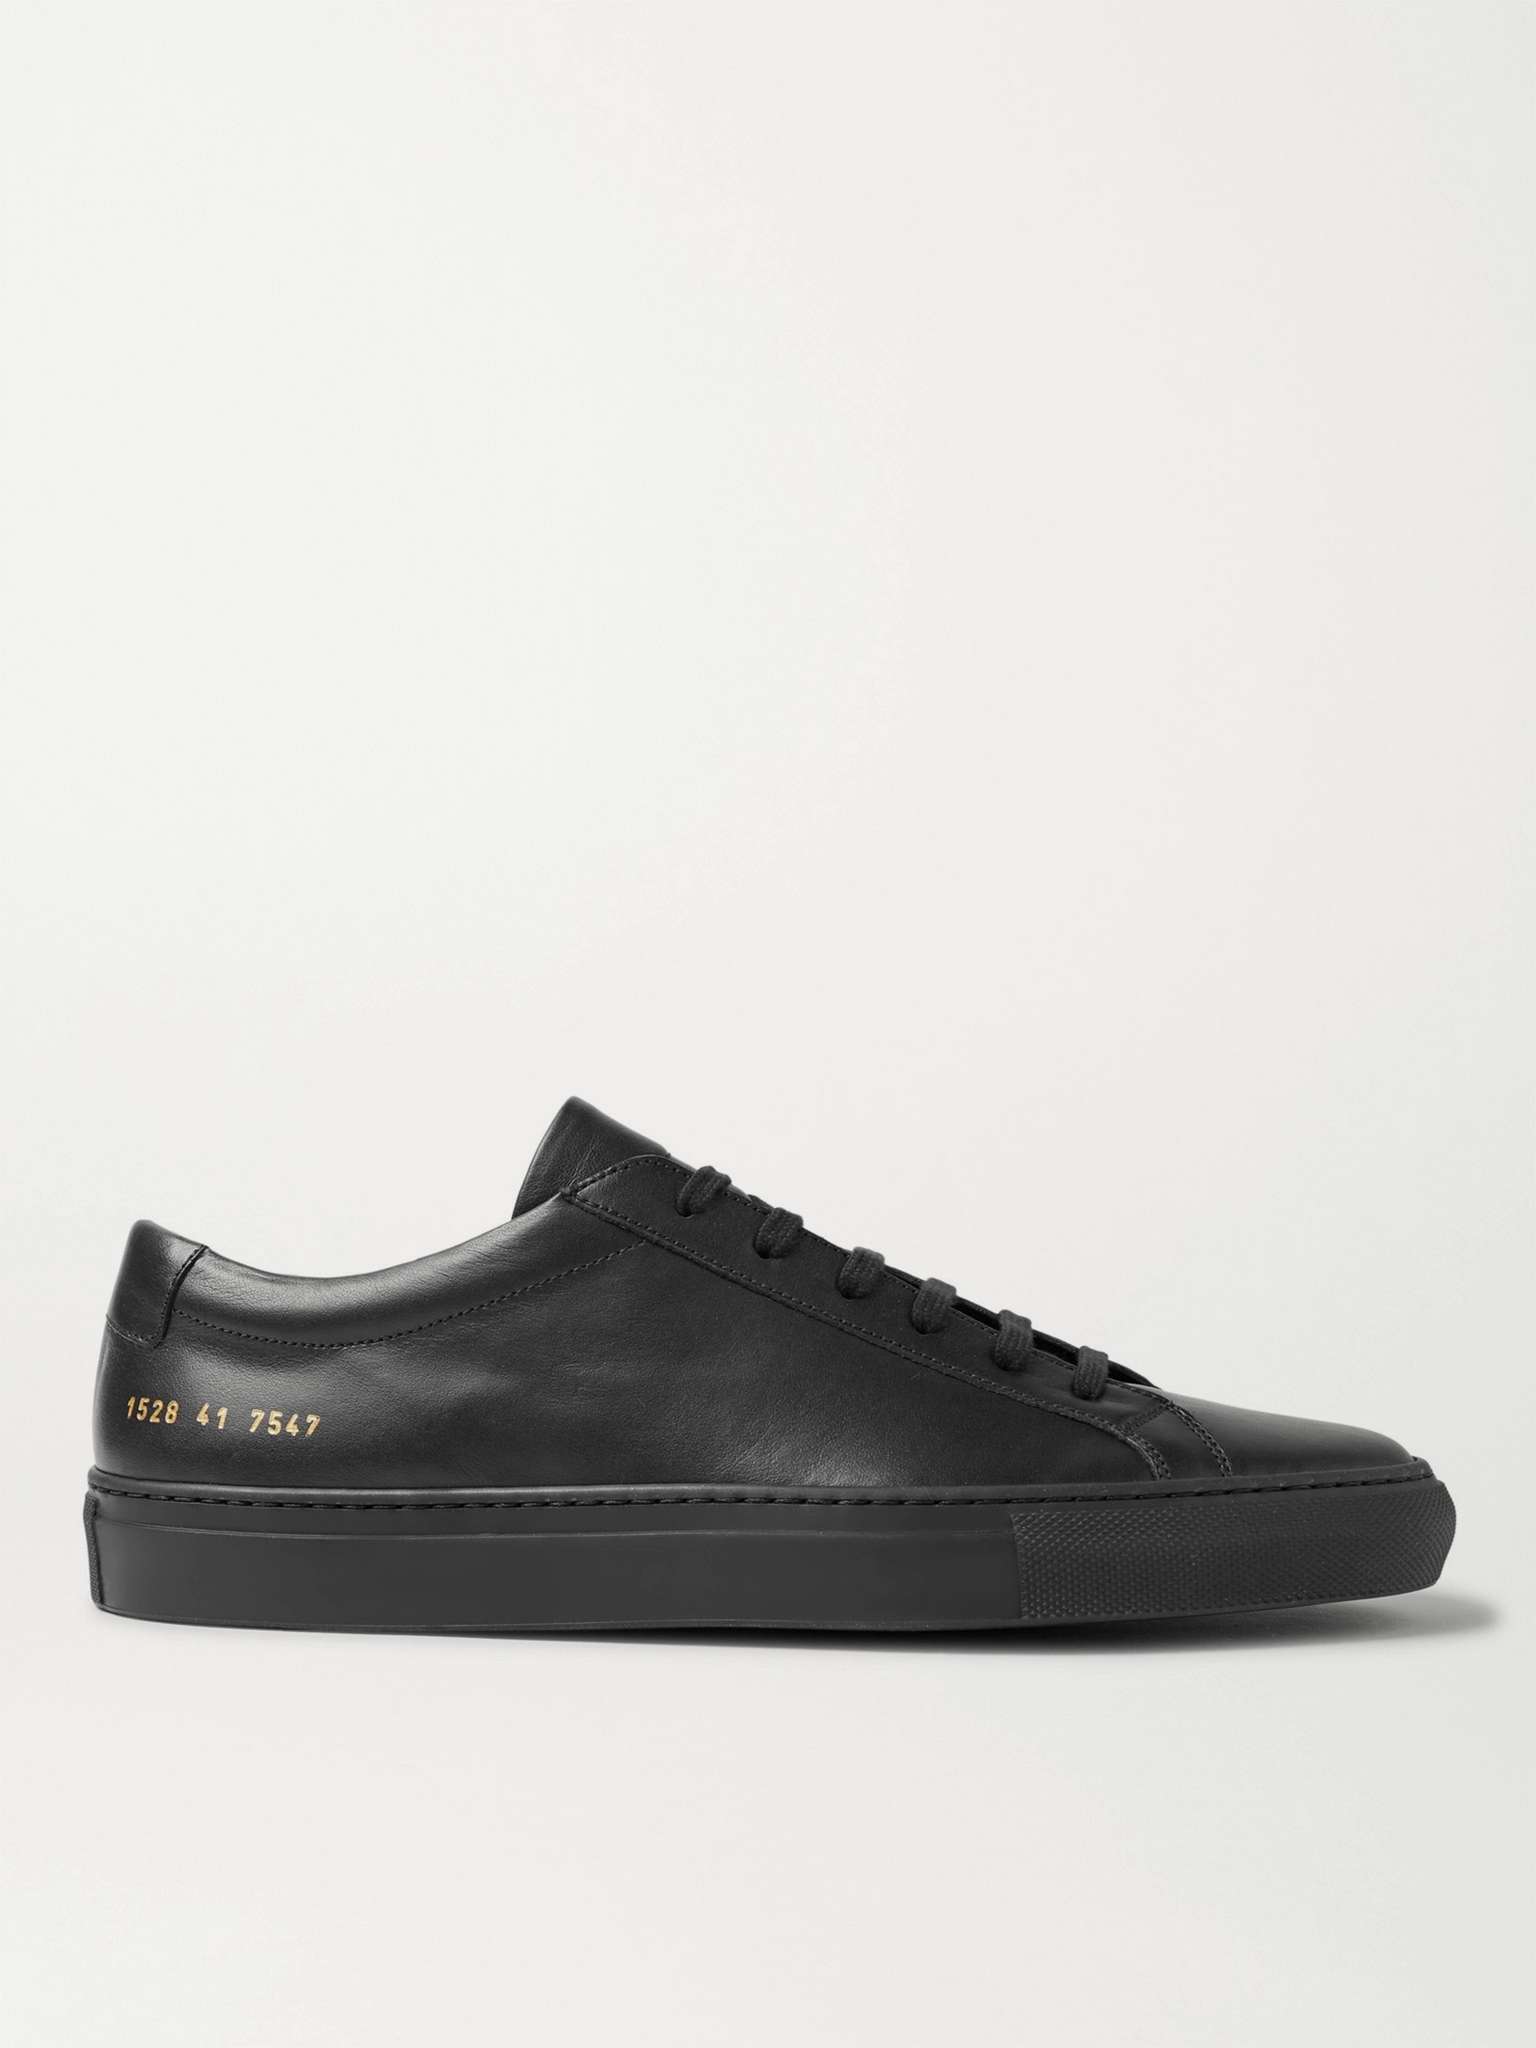 COMMON PROJECTS Original Achilles Leather Sneakers for Men | MR PORTER